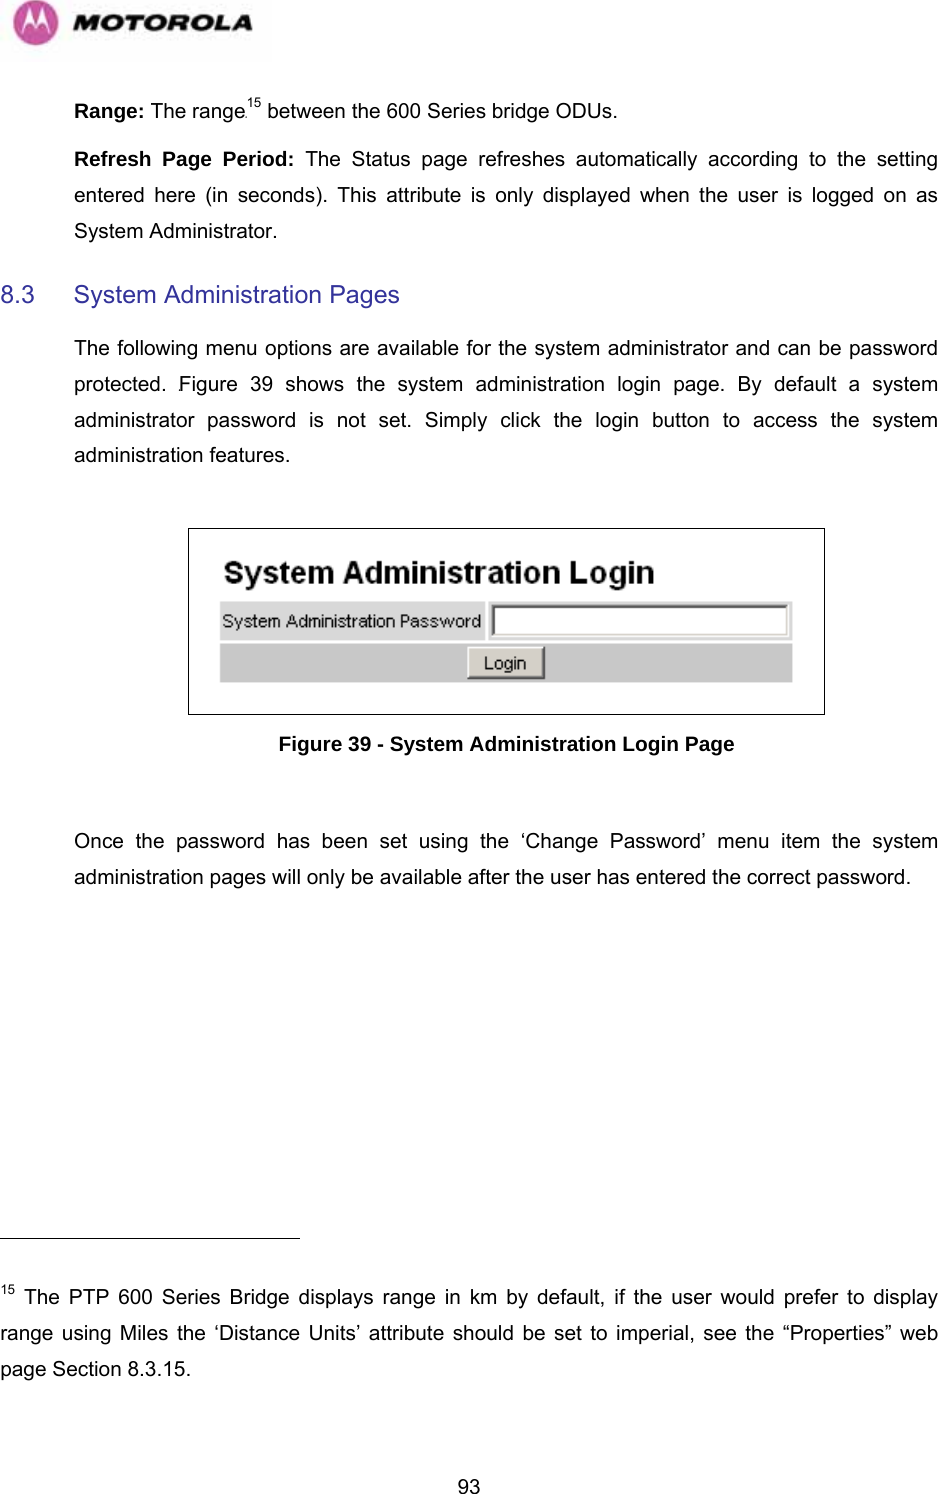   93Range: The range14F15 between the 600 Series bridge ODUs.  Refresh Page Period: The Status page refreshes automatically according to the setting entered here (in seconds). This attribute is only displayed when the user is logged on as System Administrator. 8.3  System Administration Pages  The following menu options are available for the system administrator and can be password protected.  1061HFigure 39 shows the system administration login page. By default a system administrator password is not set. Simply click the login button to access the system administration features.    Figure 39 - System Administration Login Page  Once the password has been set using the ‘Change Password’ menu item the system administration pages will only be available after the user has entered the correct password.                                                       15 The PTP 600 Series Bridge displays range in km by default, if the user would prefer to display range using Miles the ‘Distance Units’ attribute should be set to imperial, see the “Properties” web page Section 8.3.15. 